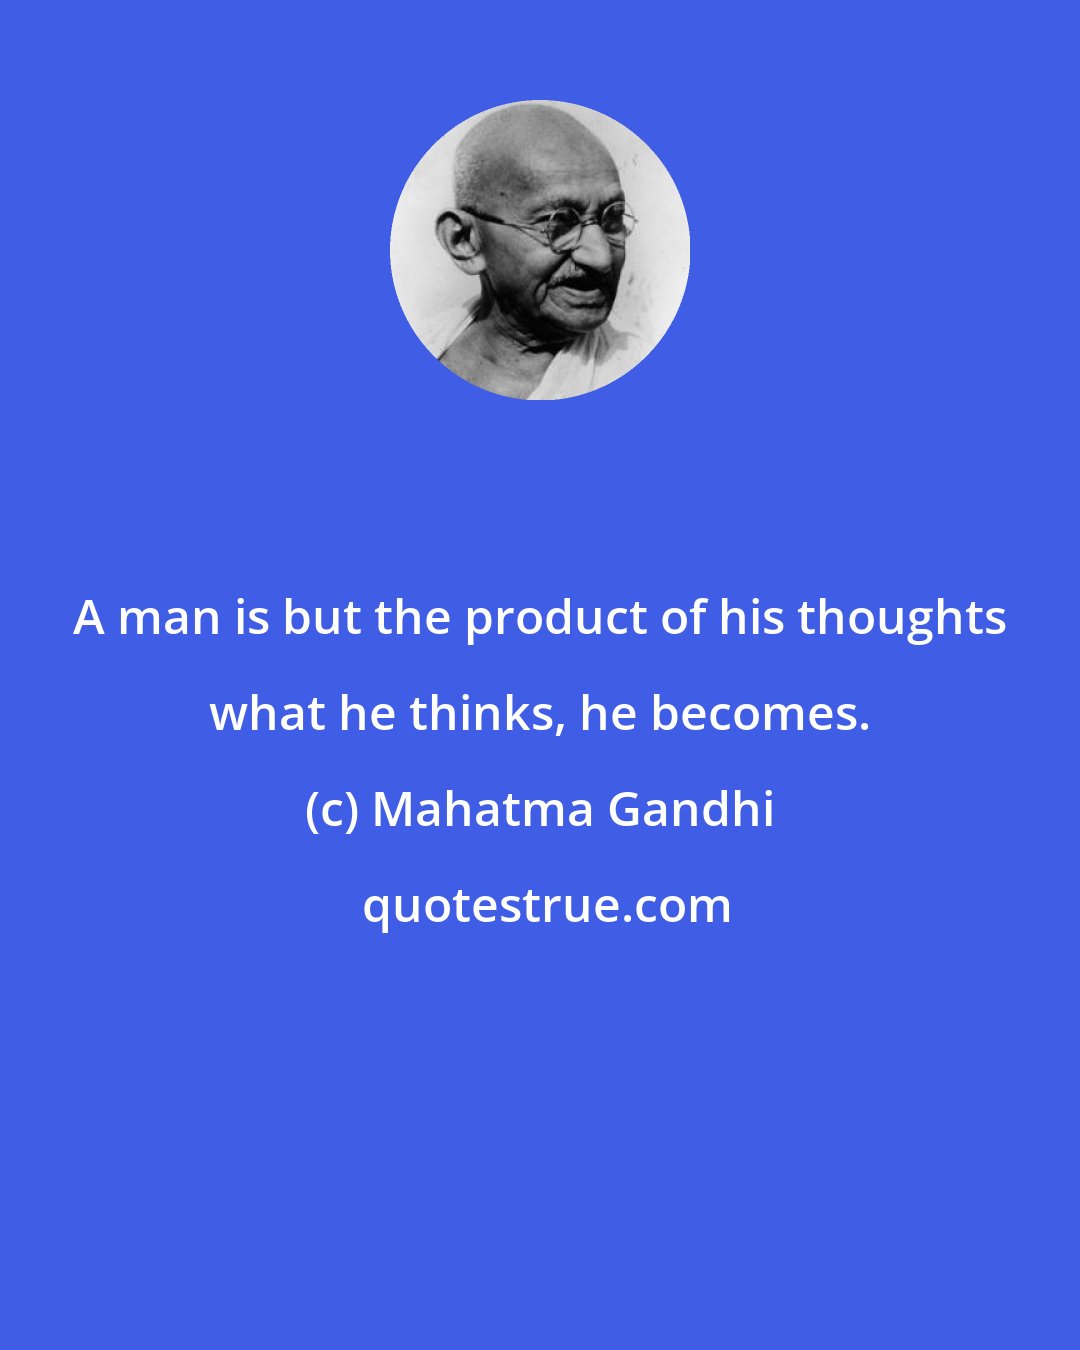 Mahatma Gandhi: A man is but the product of his thoughts what he thinks, he becomes.